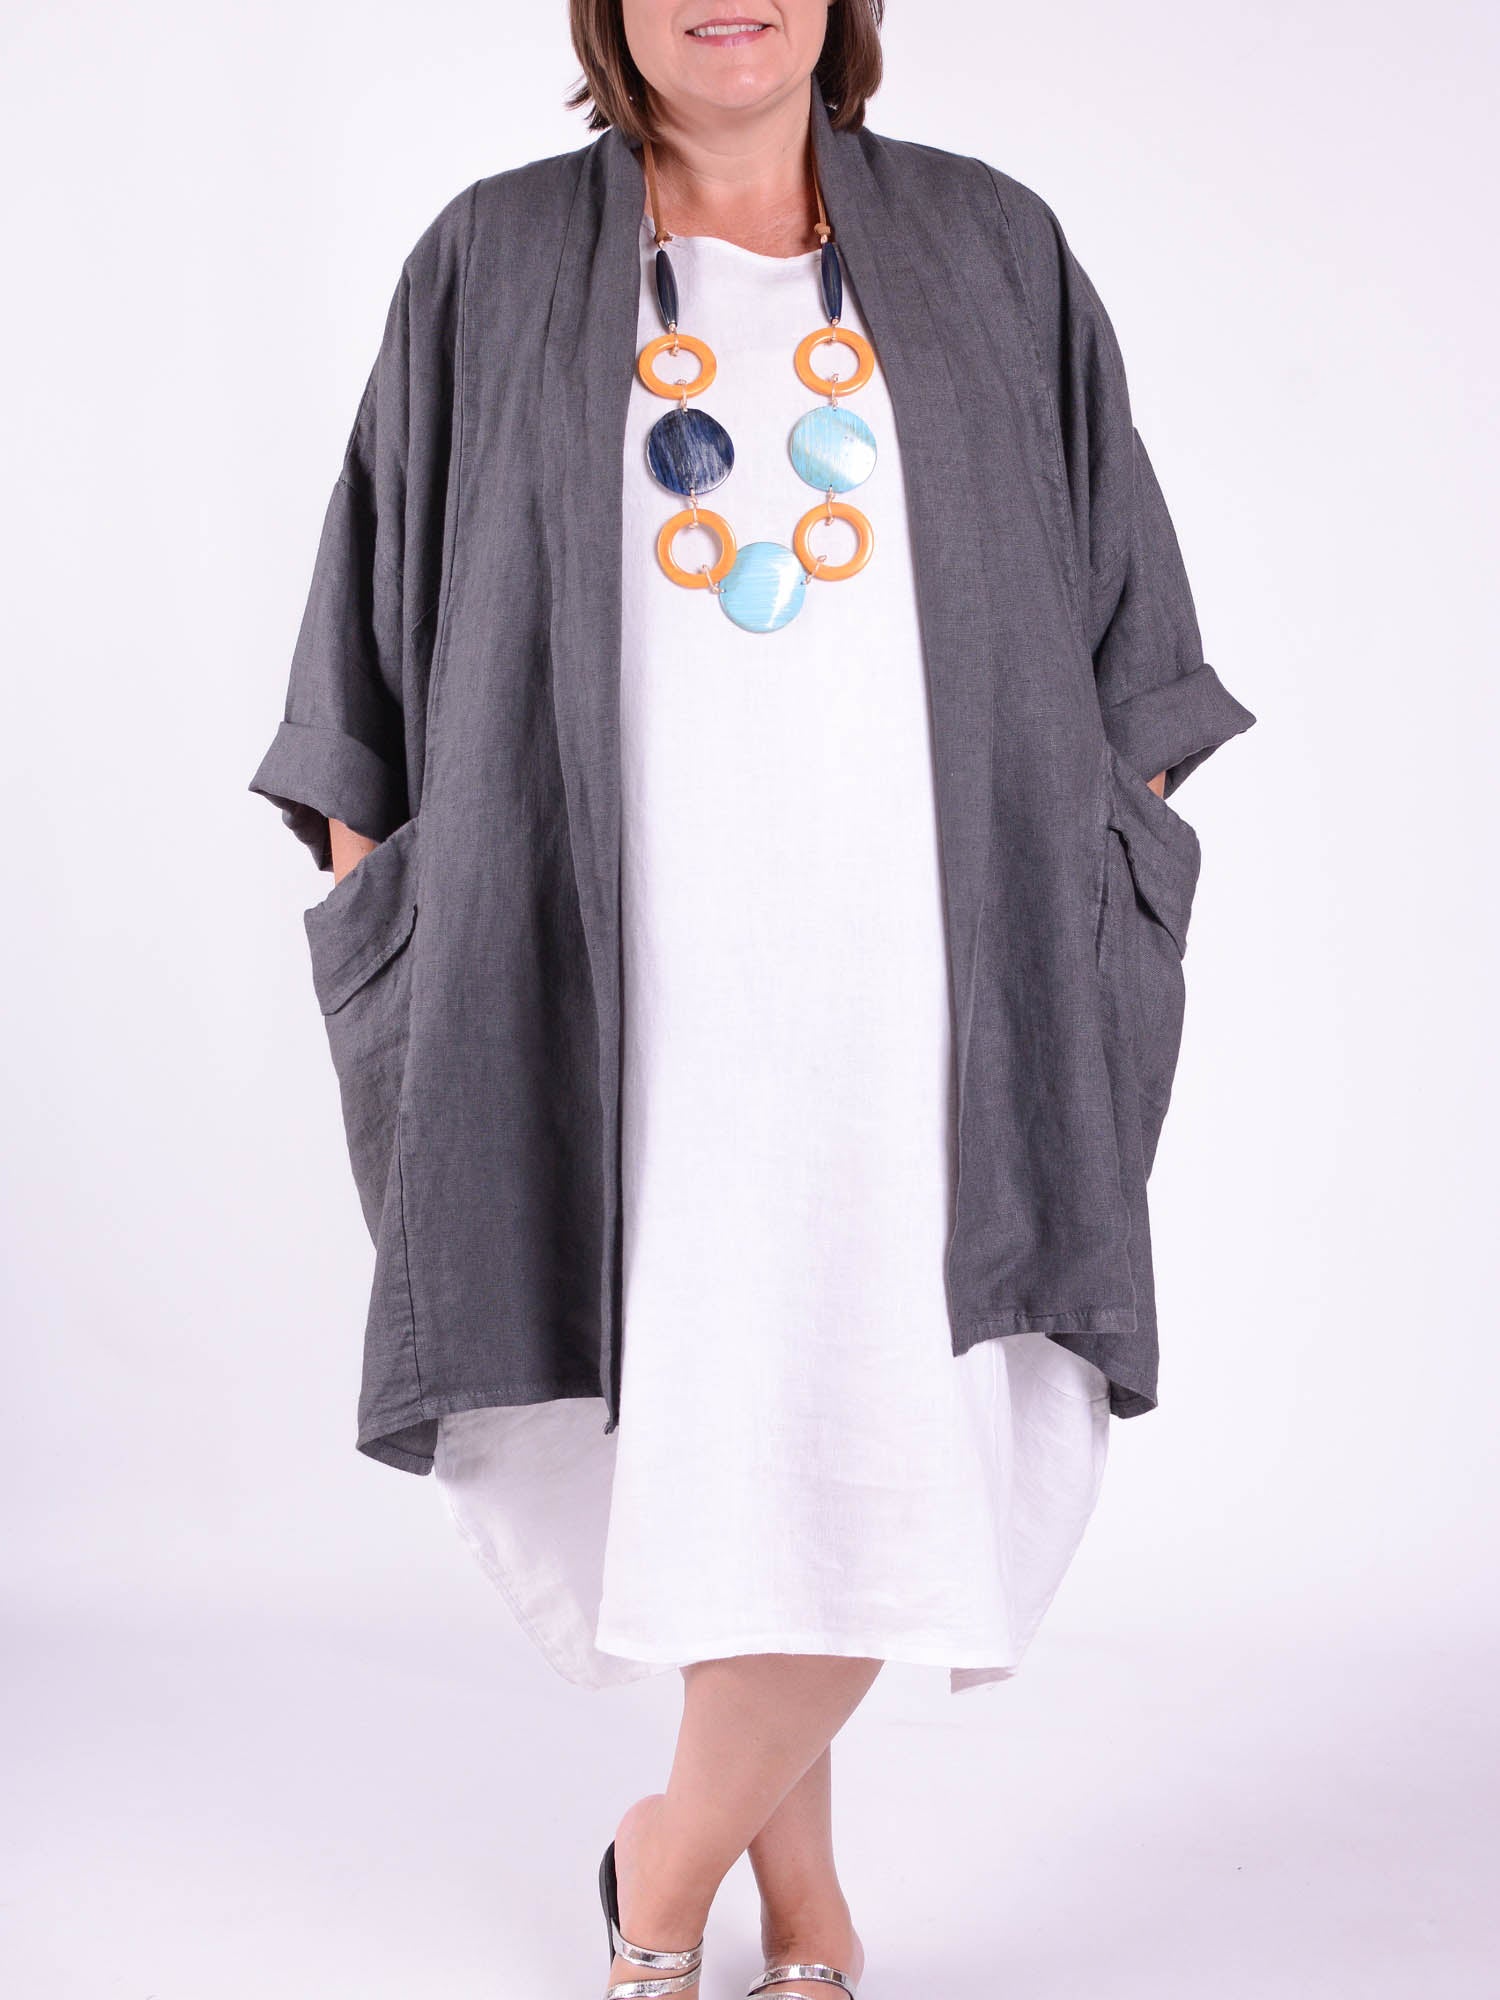 Lagenlook Open Linen Jacket - 10844, Coats & Jackets, Pure Plus Clothing, Lagenlook Clothing, Plus Size Fashion, Over 50 Fashion